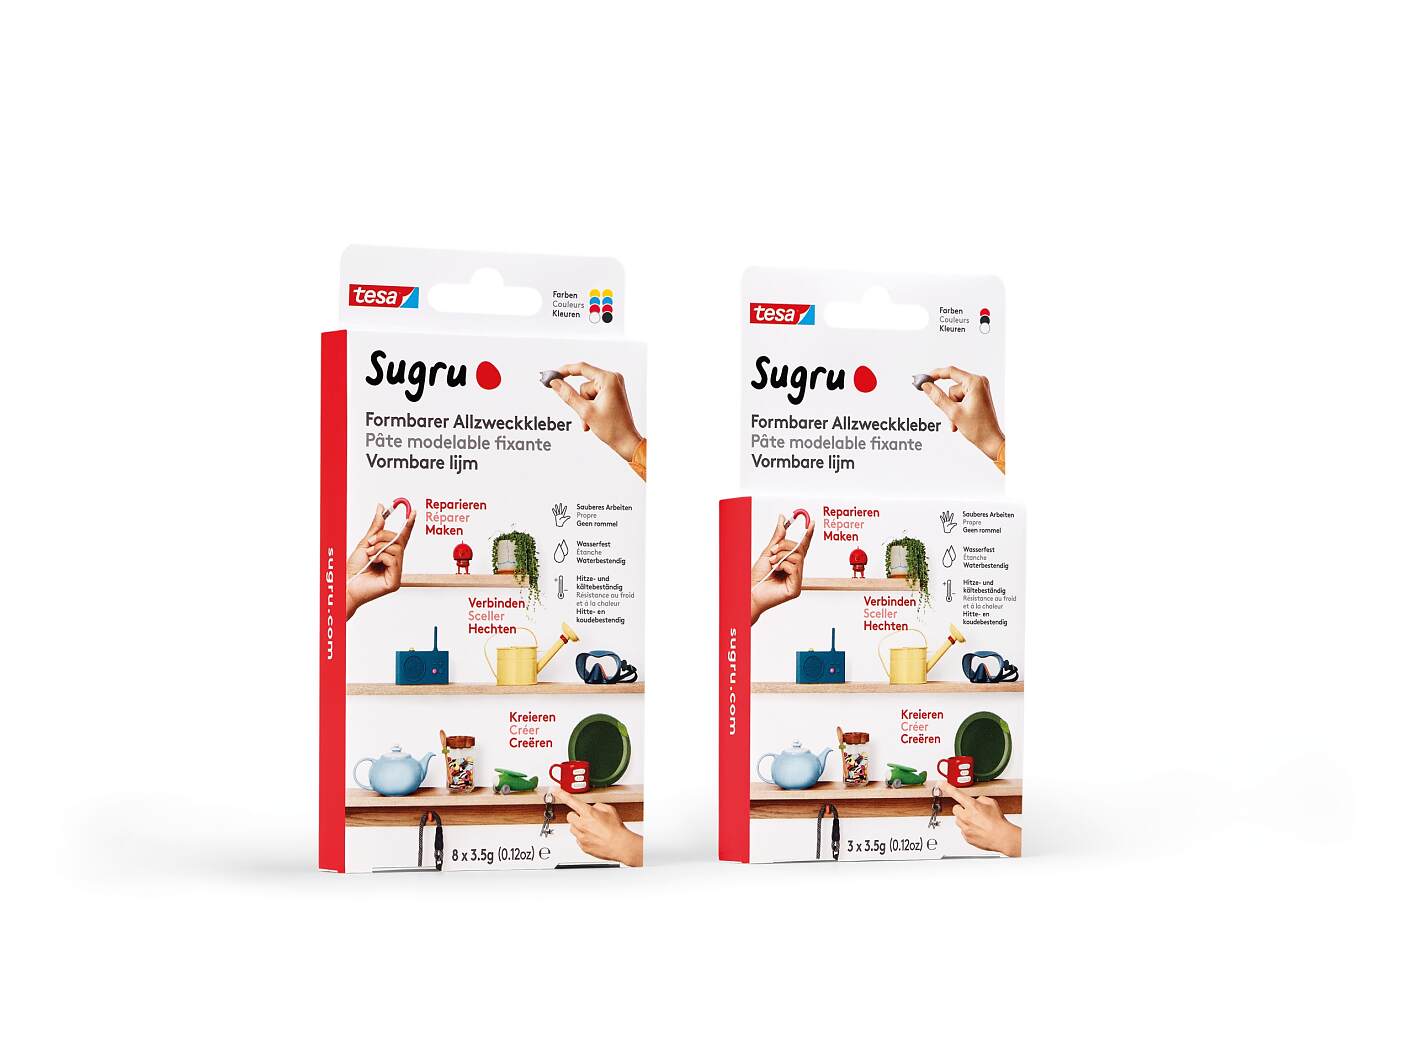 New packaging for Sugru mouldable glue